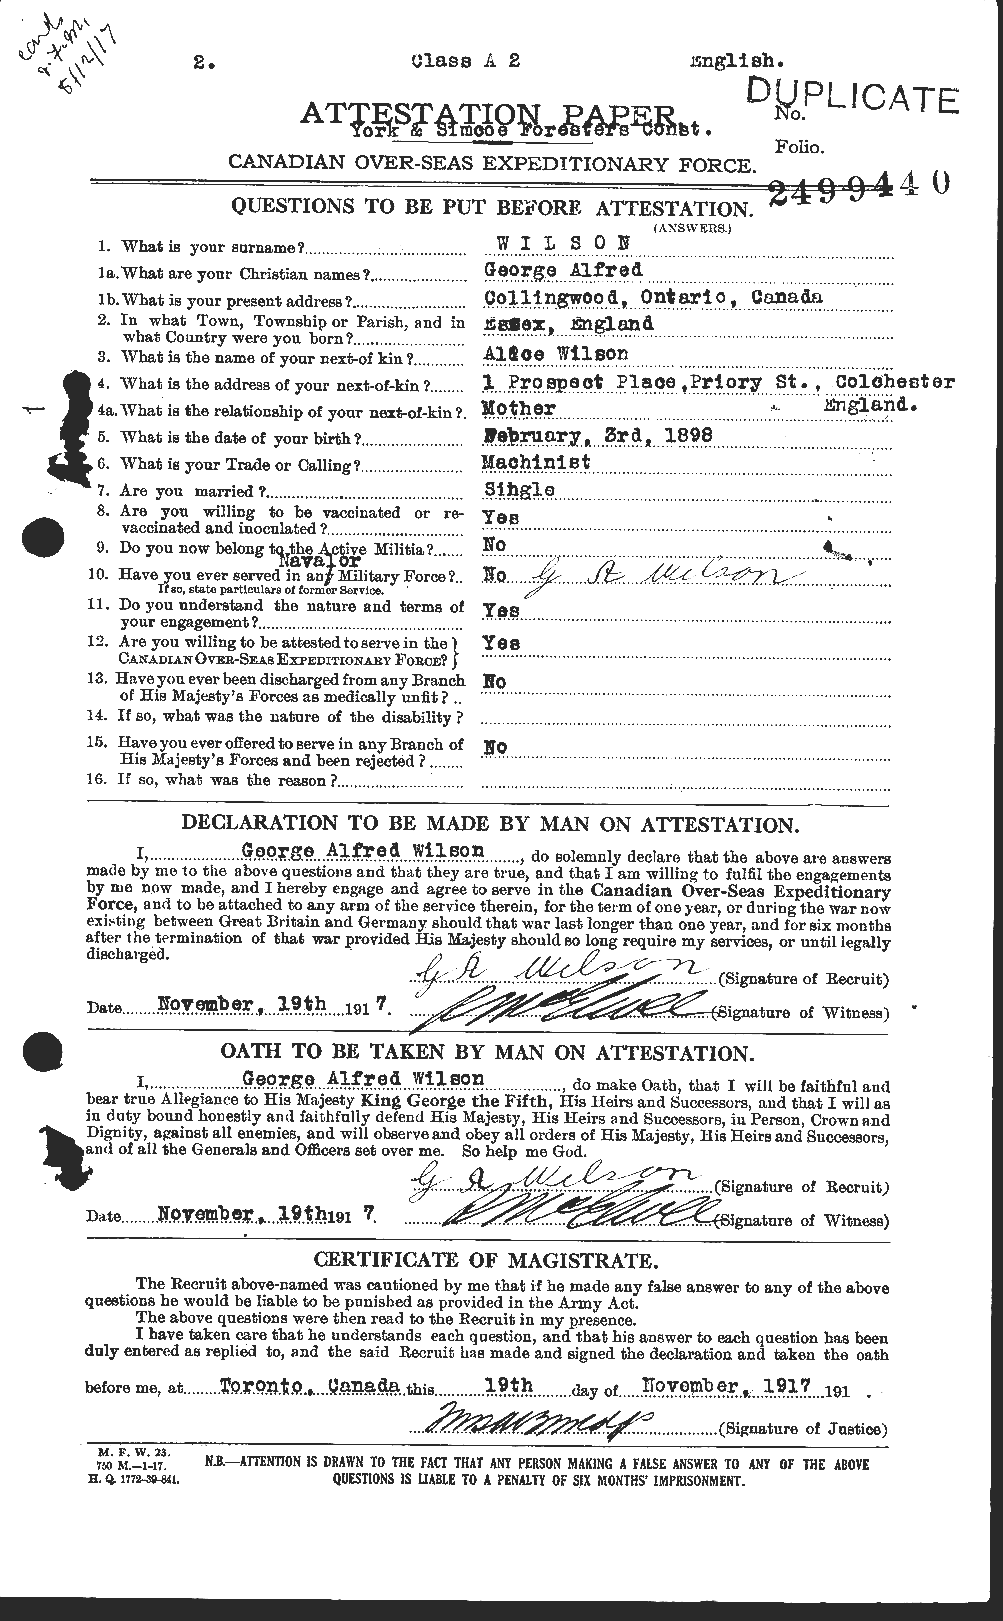 Personnel Records of the First World War - CEF 677693a